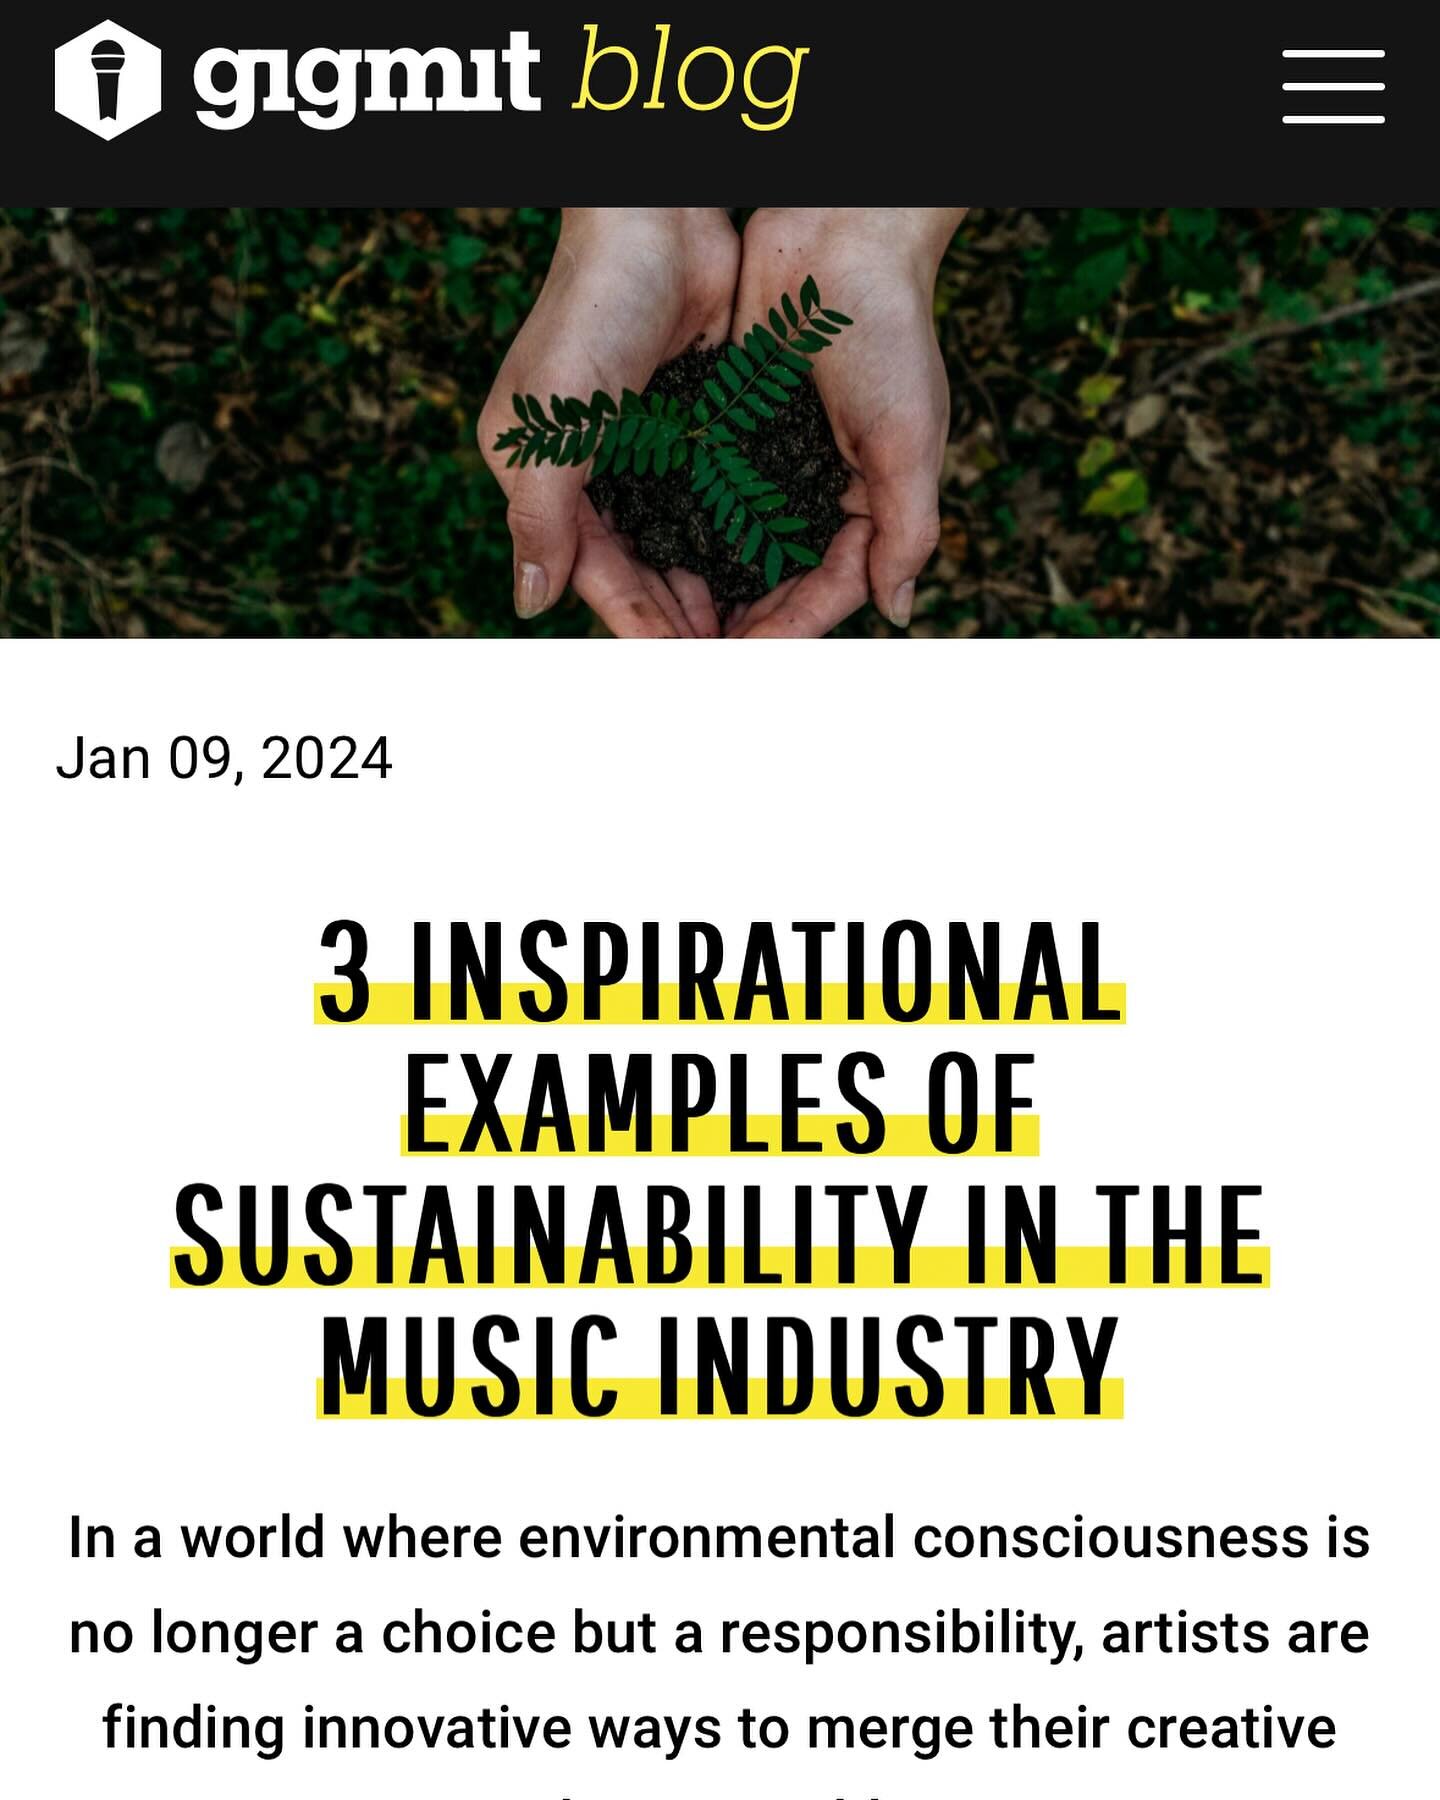 @gigmit posted a blog post! About the talk i had with them and two other amazing artists/bands about how to be a sustainable artist 💫 check it out! Link in profile

https://blog.gigmit.com/en/3-inspirational-examples-sustainability-in-music/?utm_sou